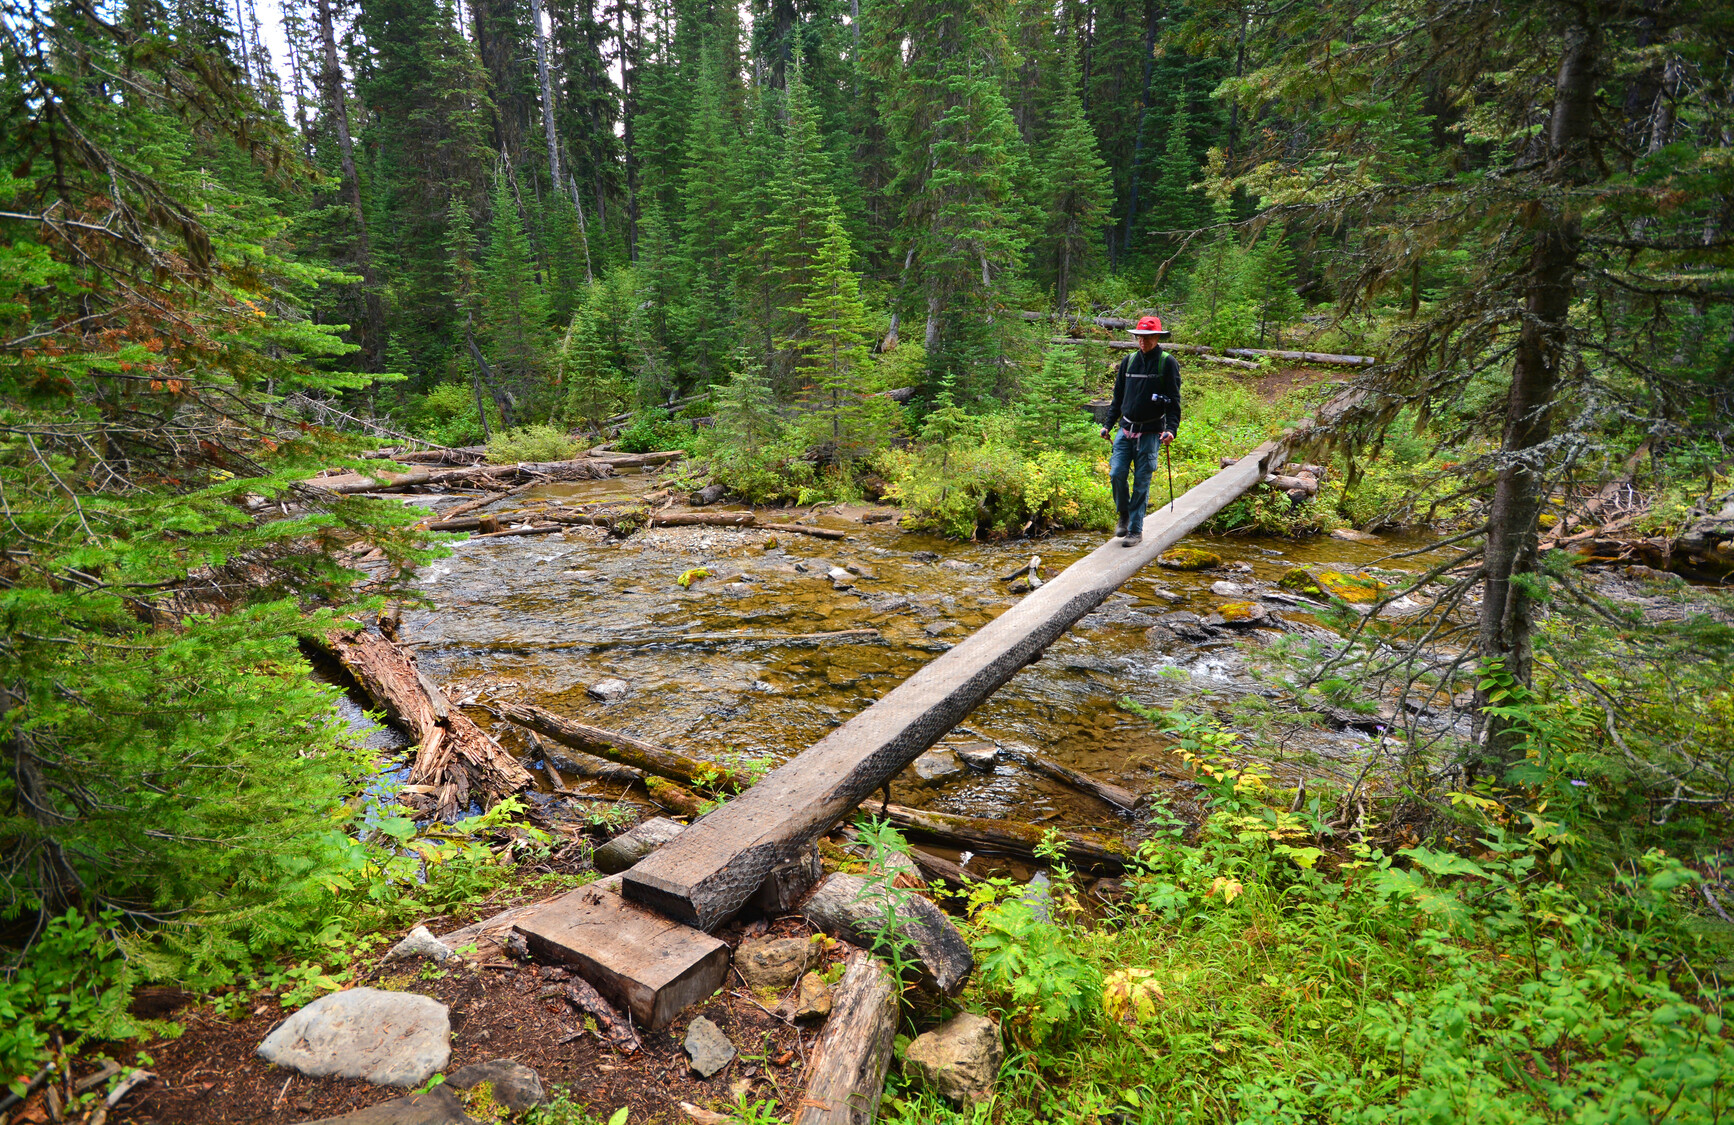 A park visitor crossing a single log bridge over a creek in Top of the World Park. Forest surrounds the area.